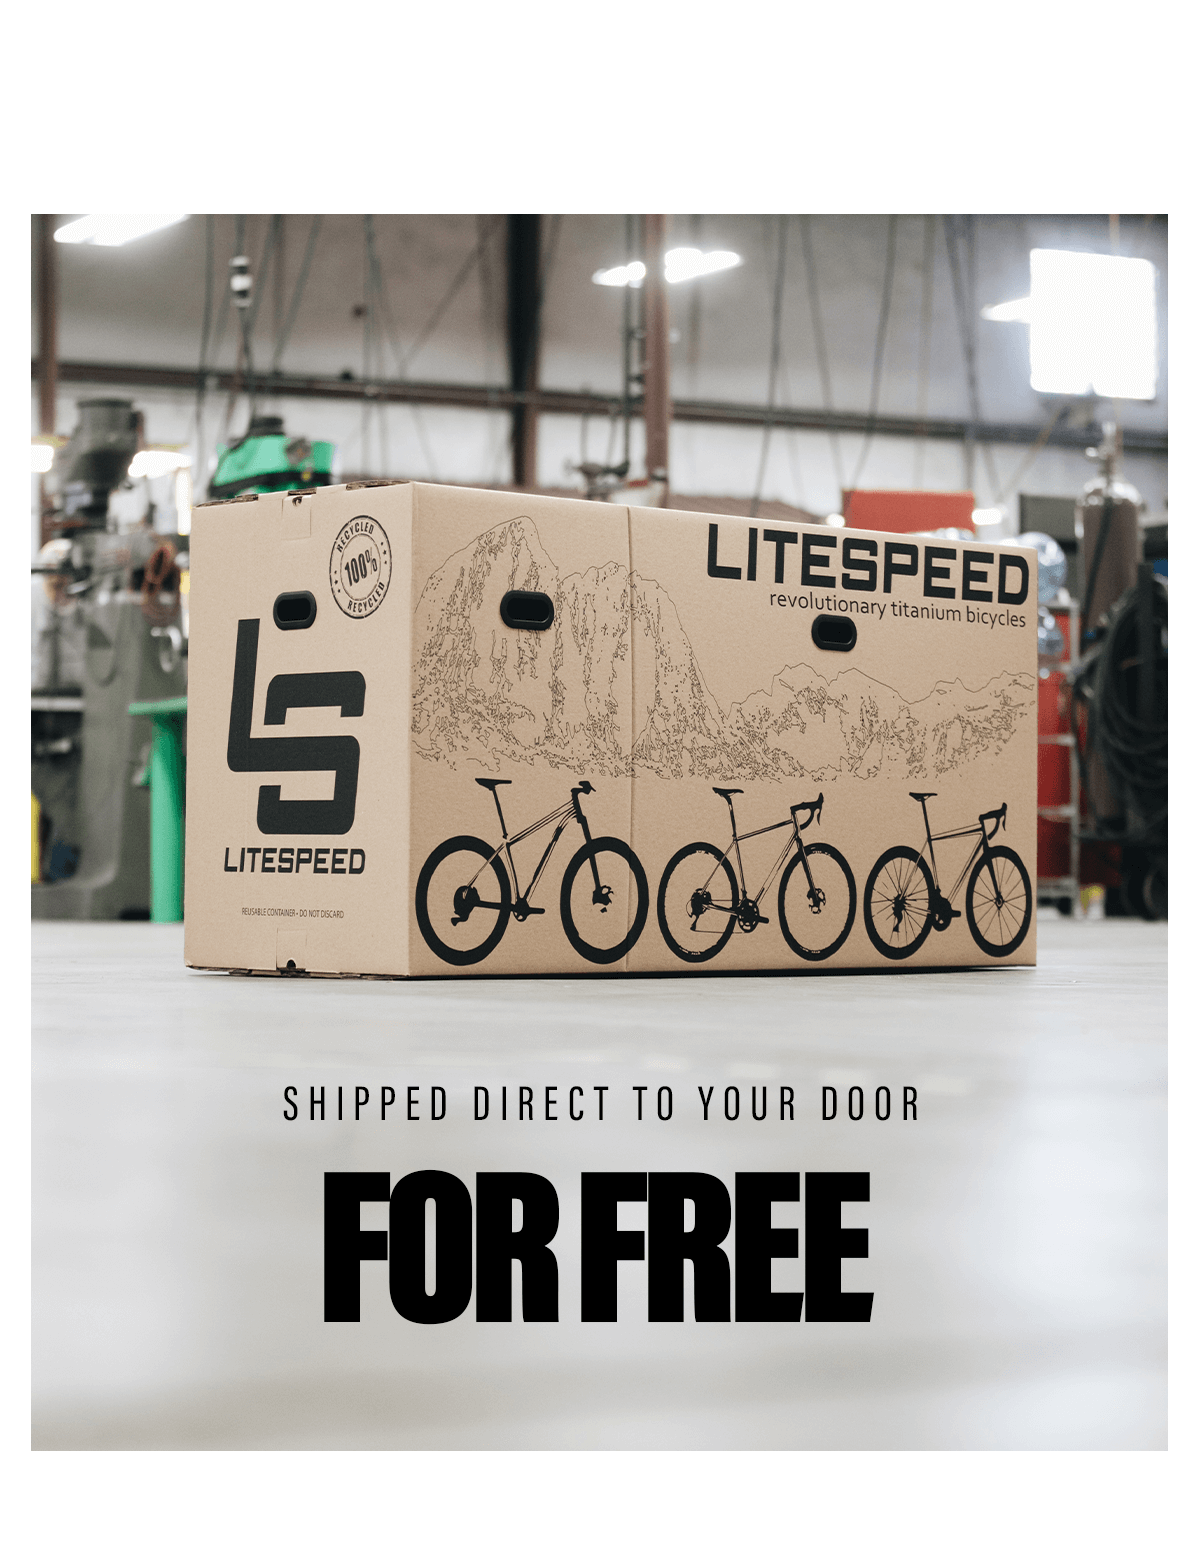 Shipped direct to your door, for free!